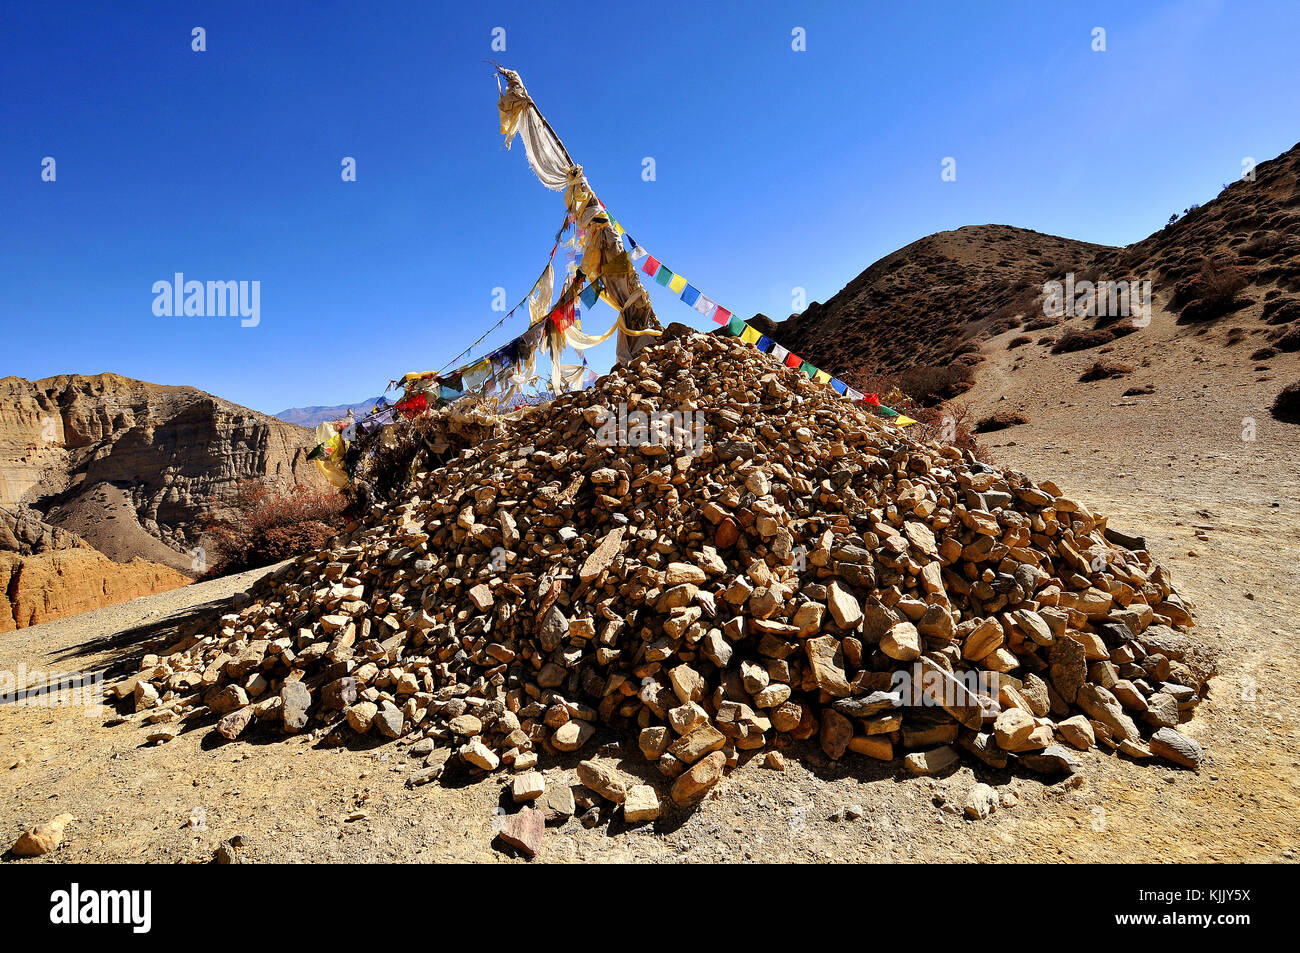 Cairn and prayer flags, Mustang. Nepal. Stock Photo